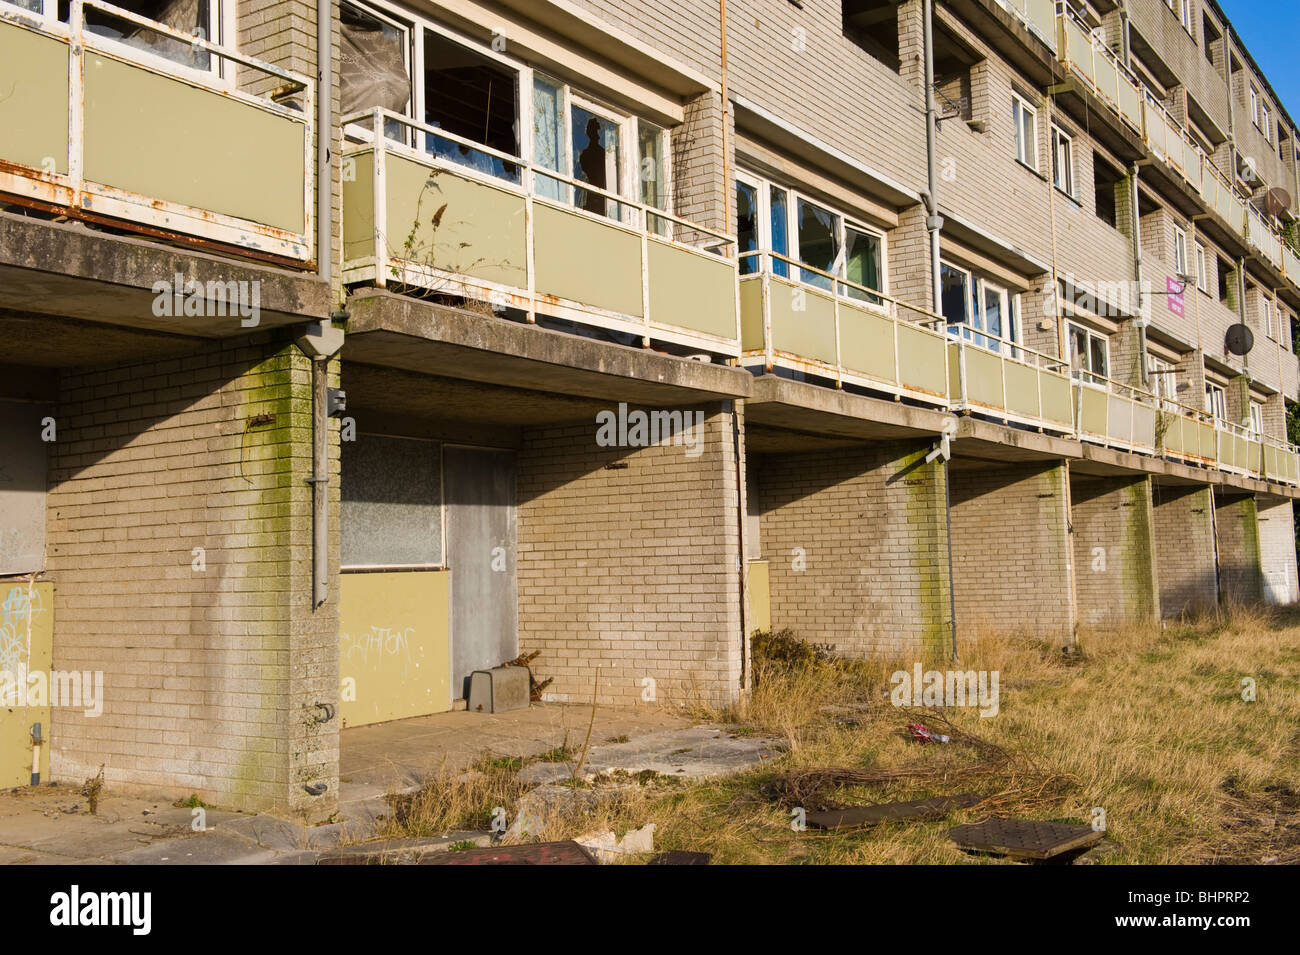 Derelict 'Billy Banks' Estate of council flats now known as the Penarth Heights Regeneration Project, Penarth, South Wales, UK Stock Photo